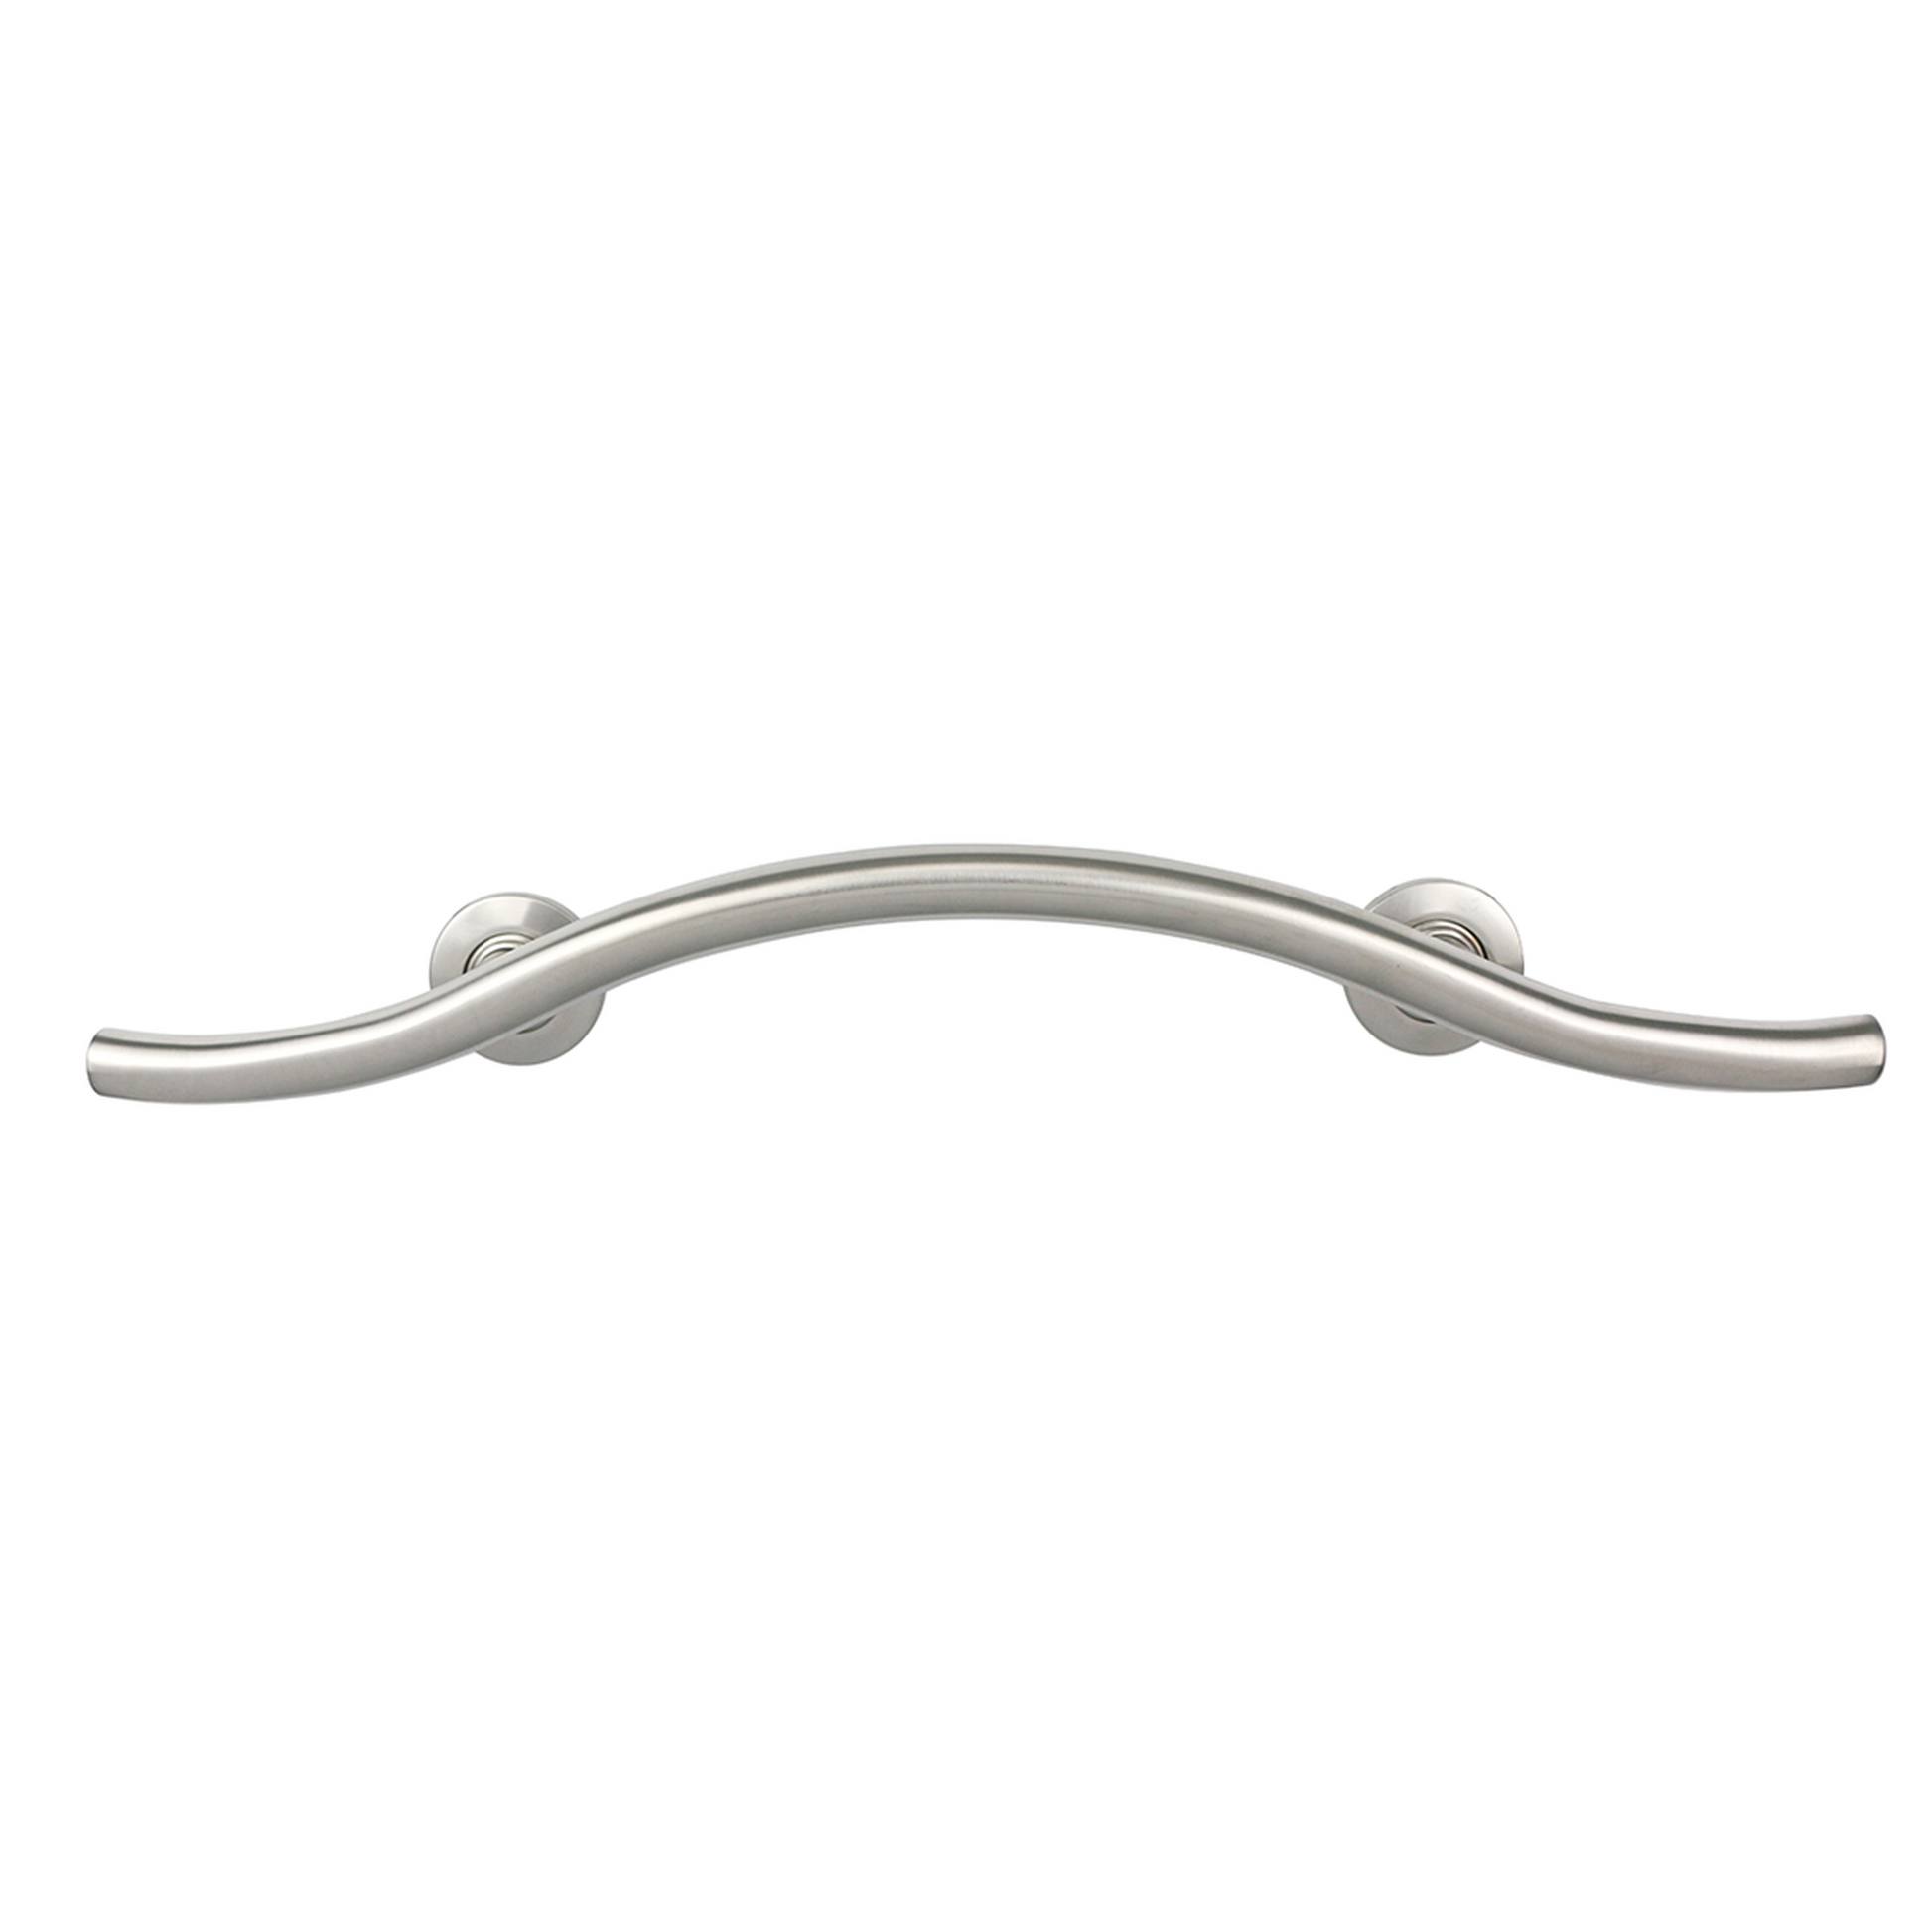 Seachrome Lifestyle & Wellness 30" Satin Stainless Steel 1.25 Diameter Concealed Flange Maverick Double Arched Grab Bar